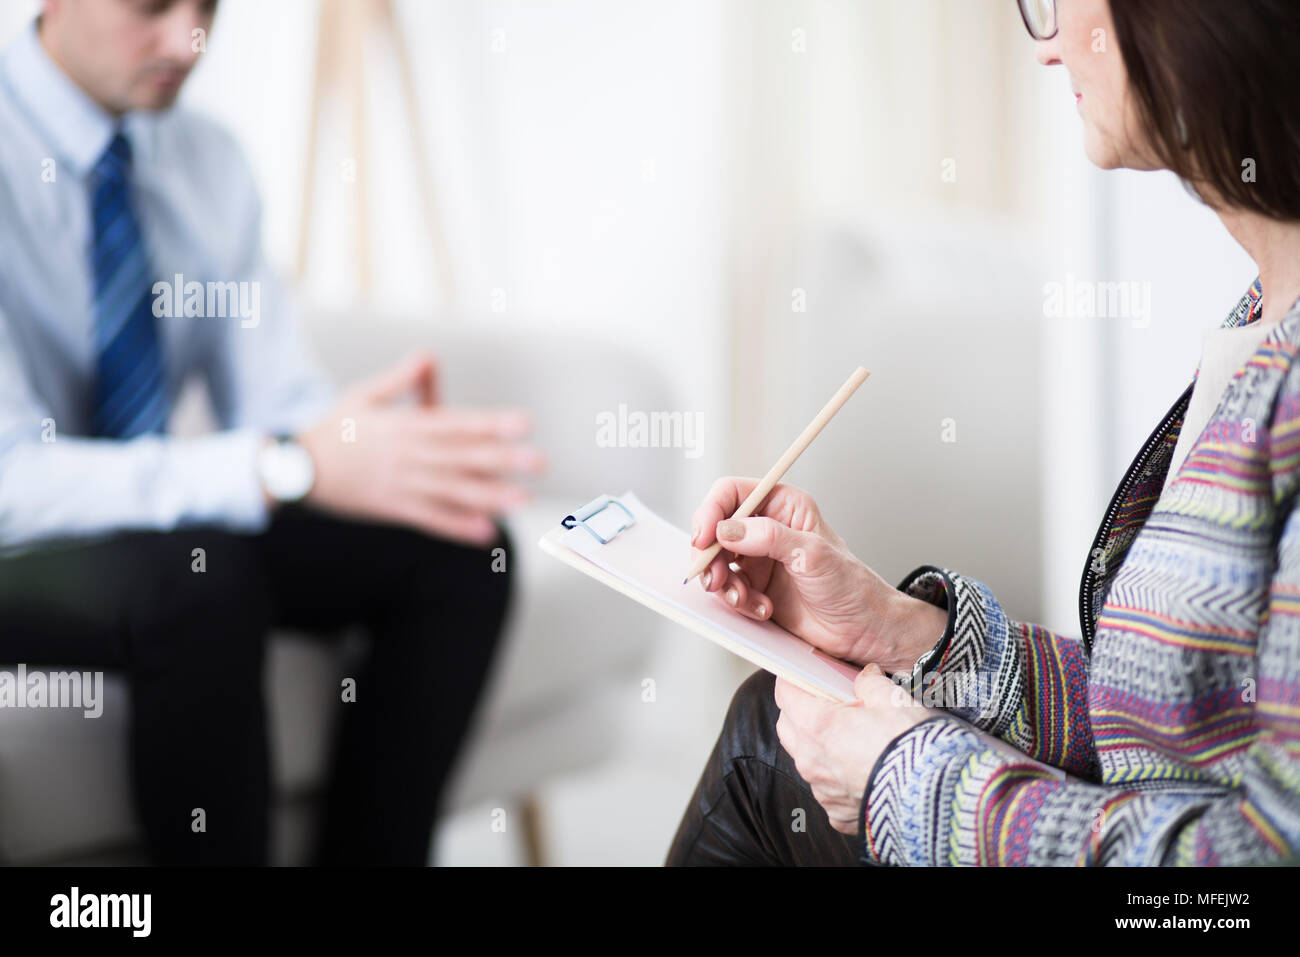 Elder therapist writing down notes during a conversation with her patient Stock Photo